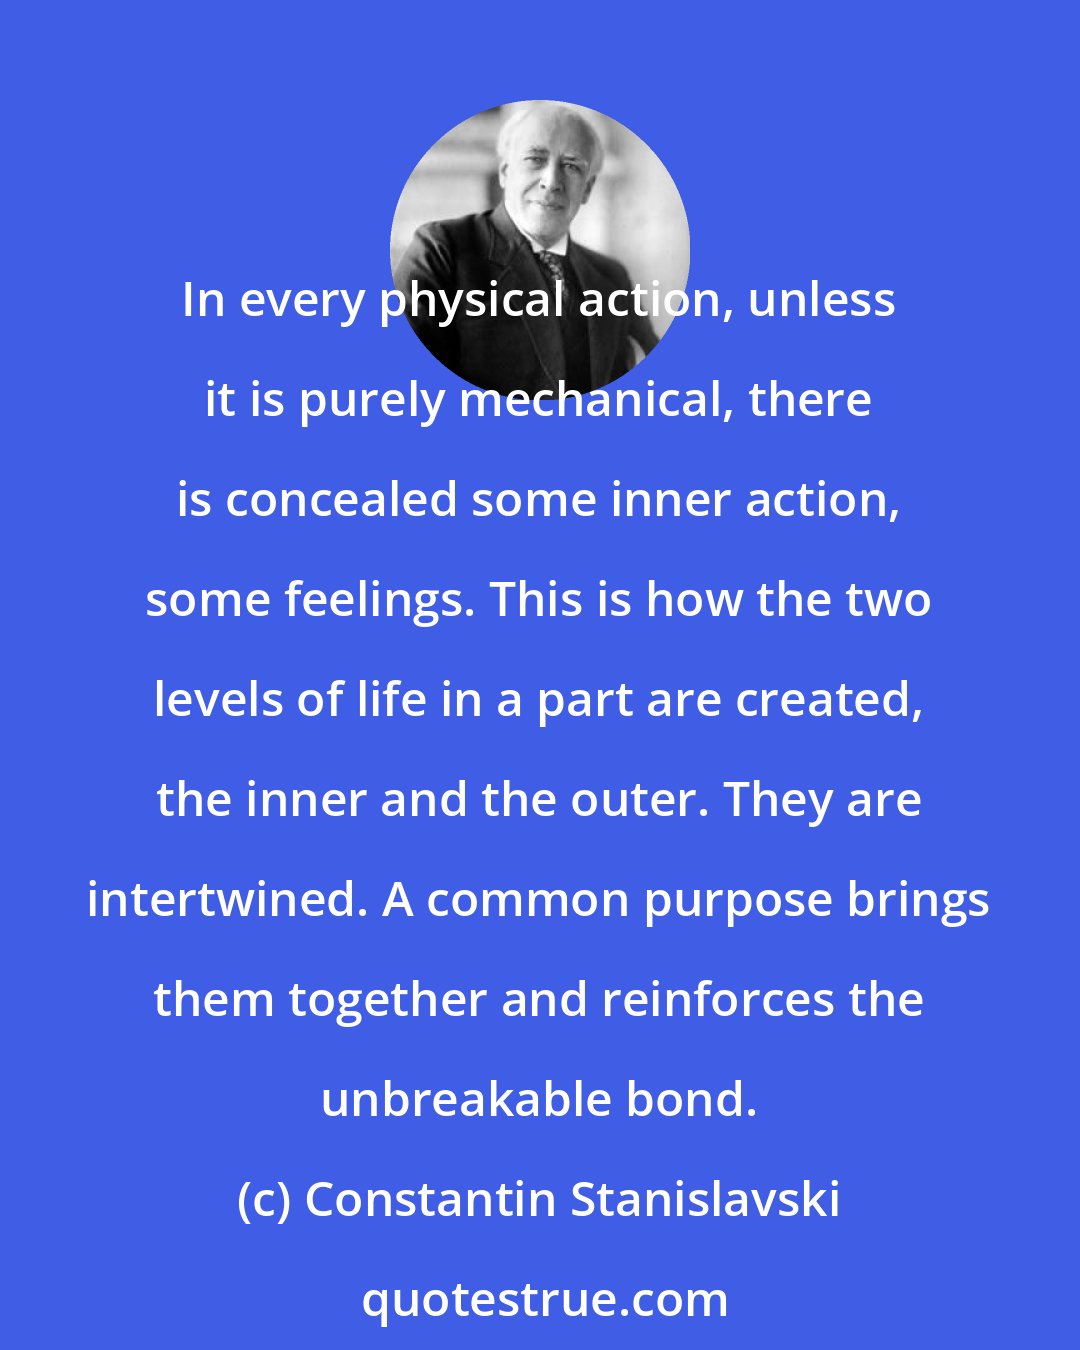 Constantin Stanislavski: In every physical action, unless it is purely mechanical, there is concealed some inner action, some feelings. This is how the two levels of life in a part are created, the inner and the outer. They are intertwined. A common purpose brings them together and reinforces the unbreakable bond.